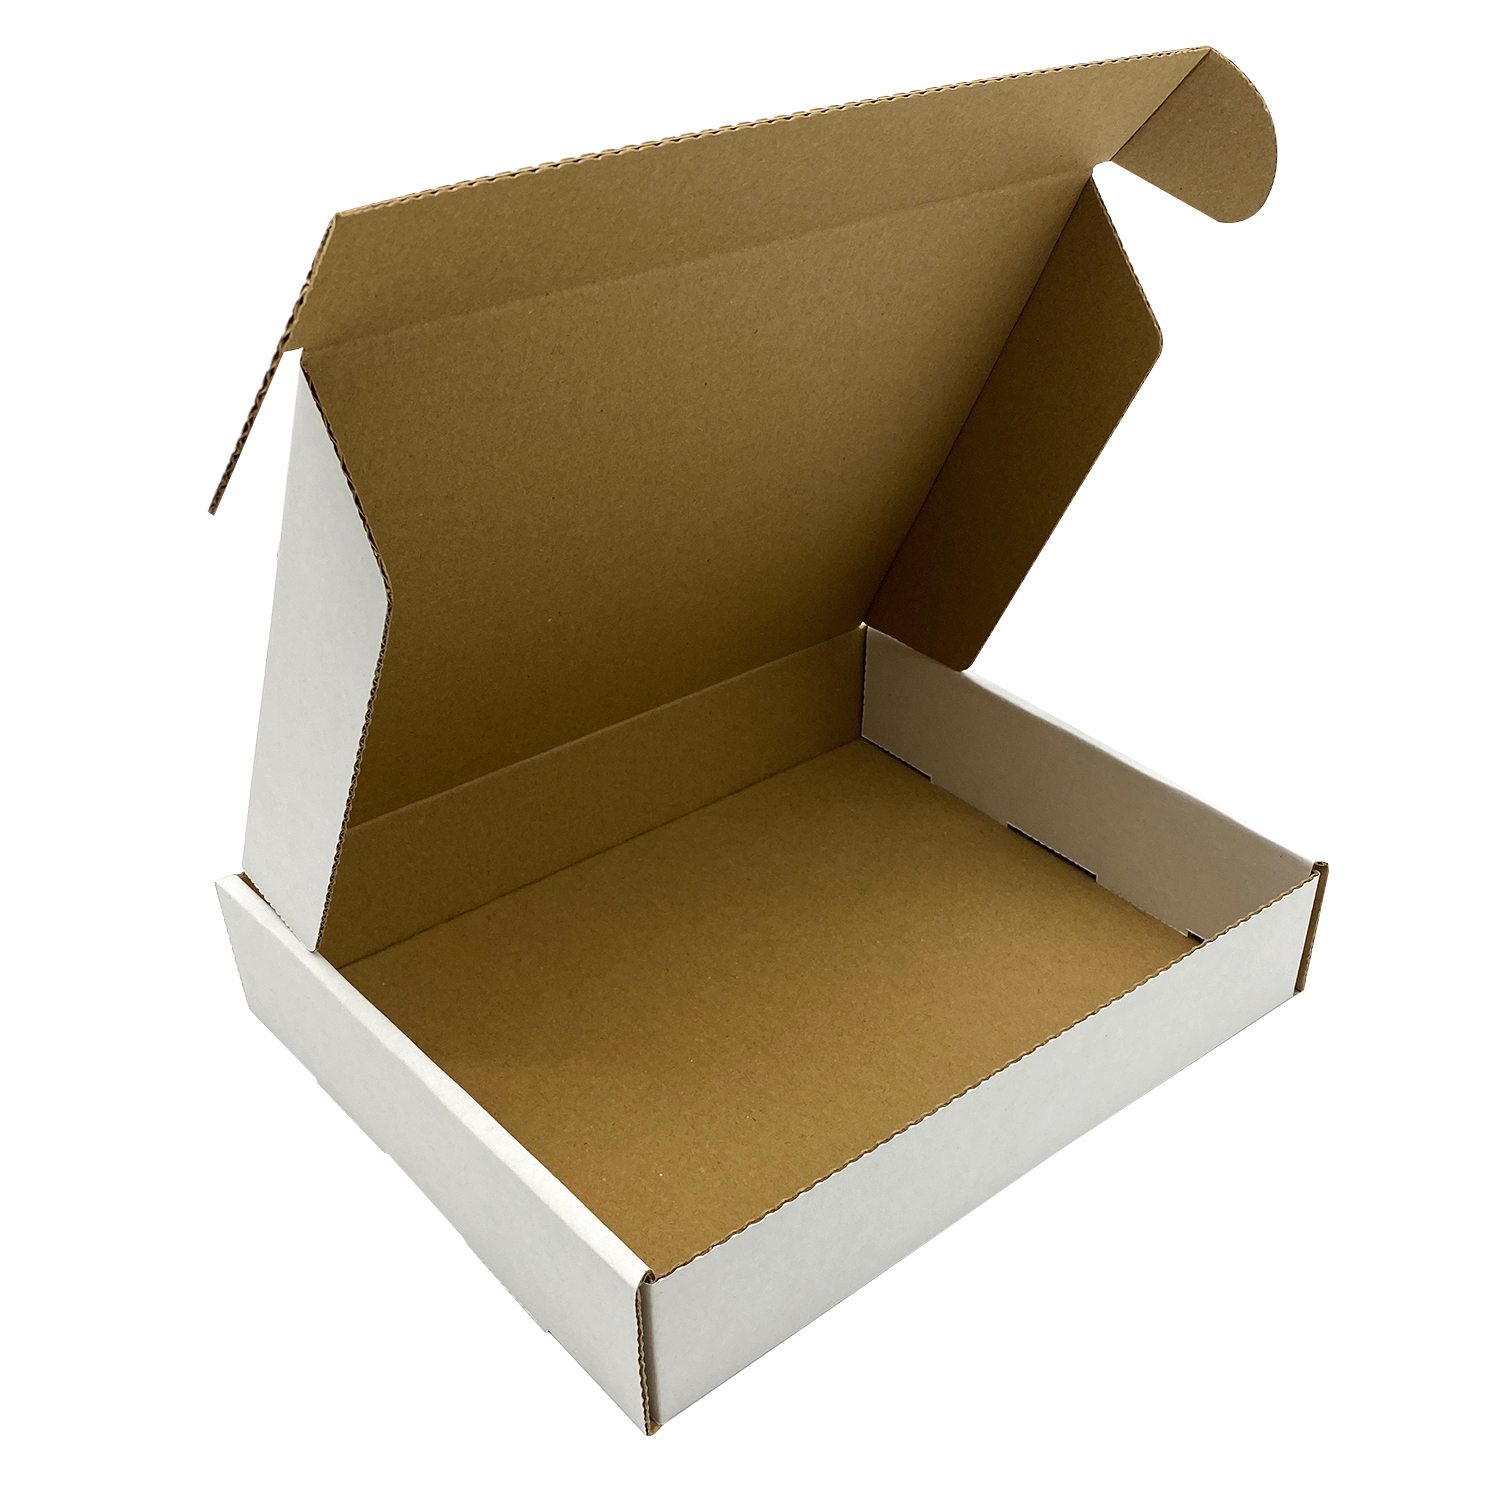 Small Parcel Postal Boxes – White (270mm x 180mm x 80mm)